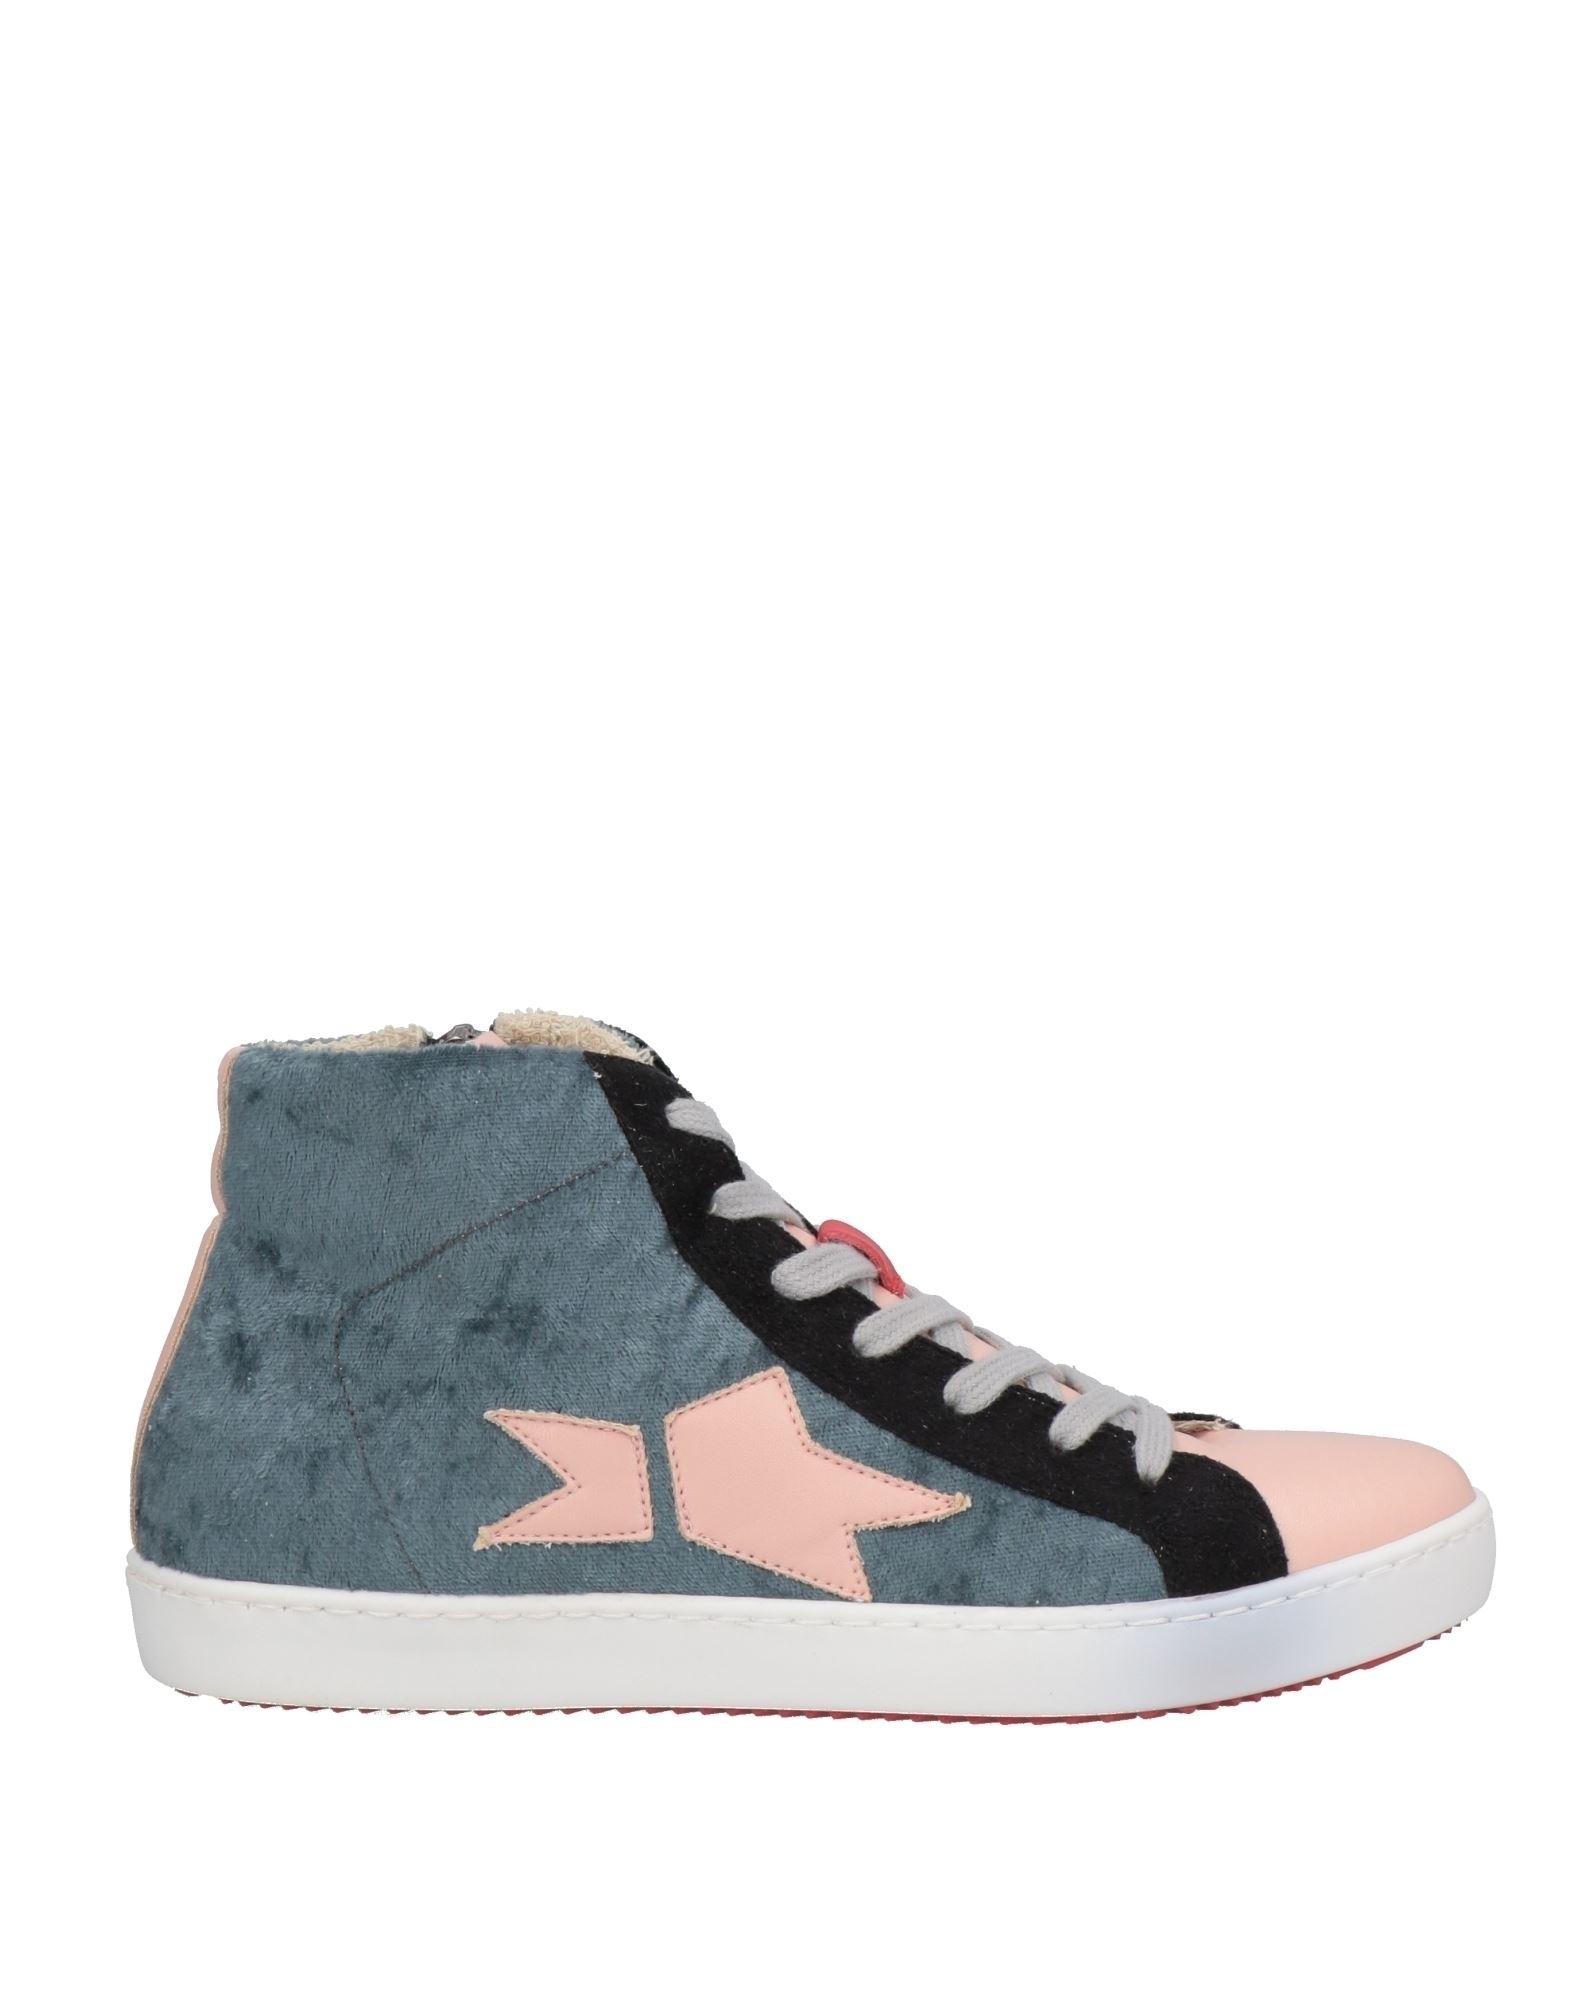 Sequel By Ishikawa Sneakers In Pink